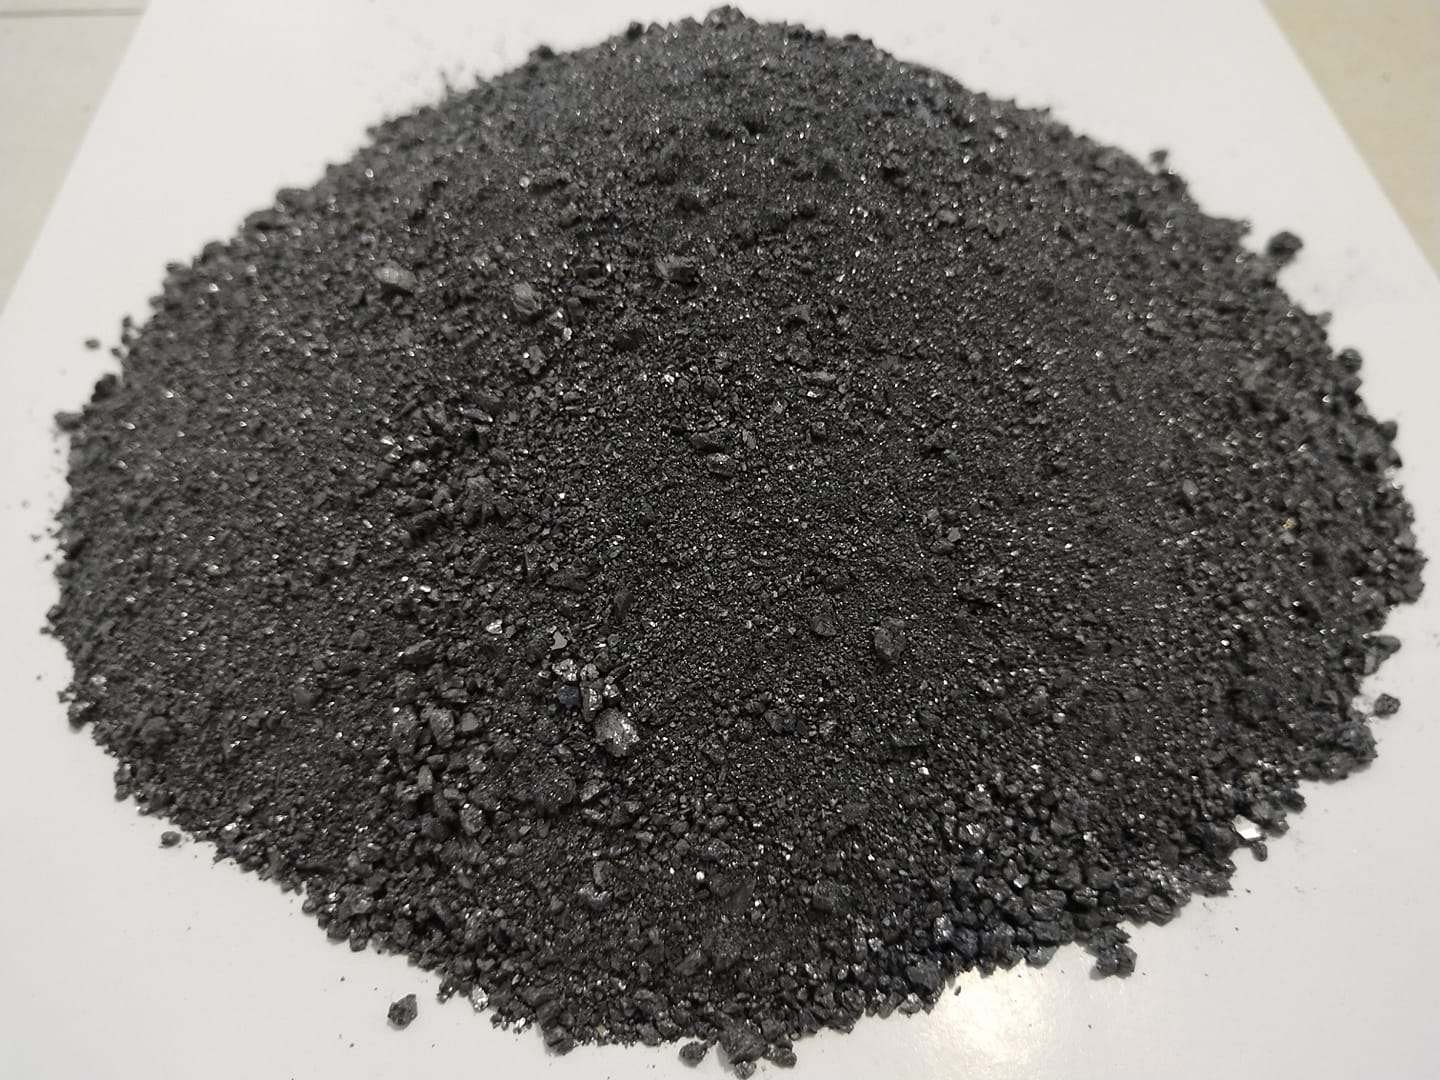 The foundry used silicon carbide to cut costs